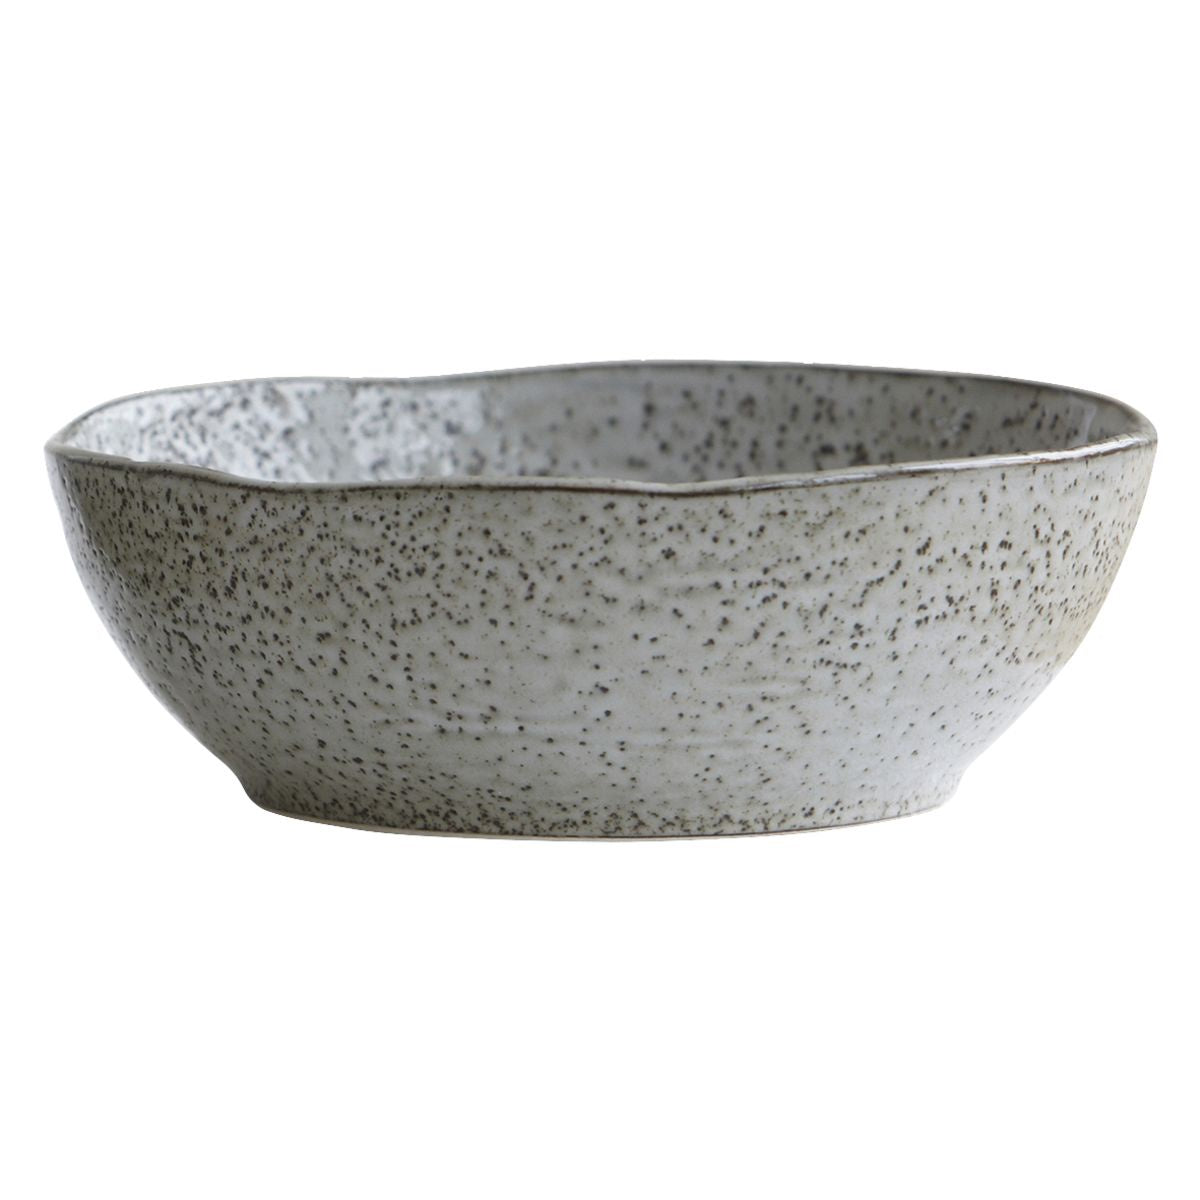 House Doctor Bowl Rustic